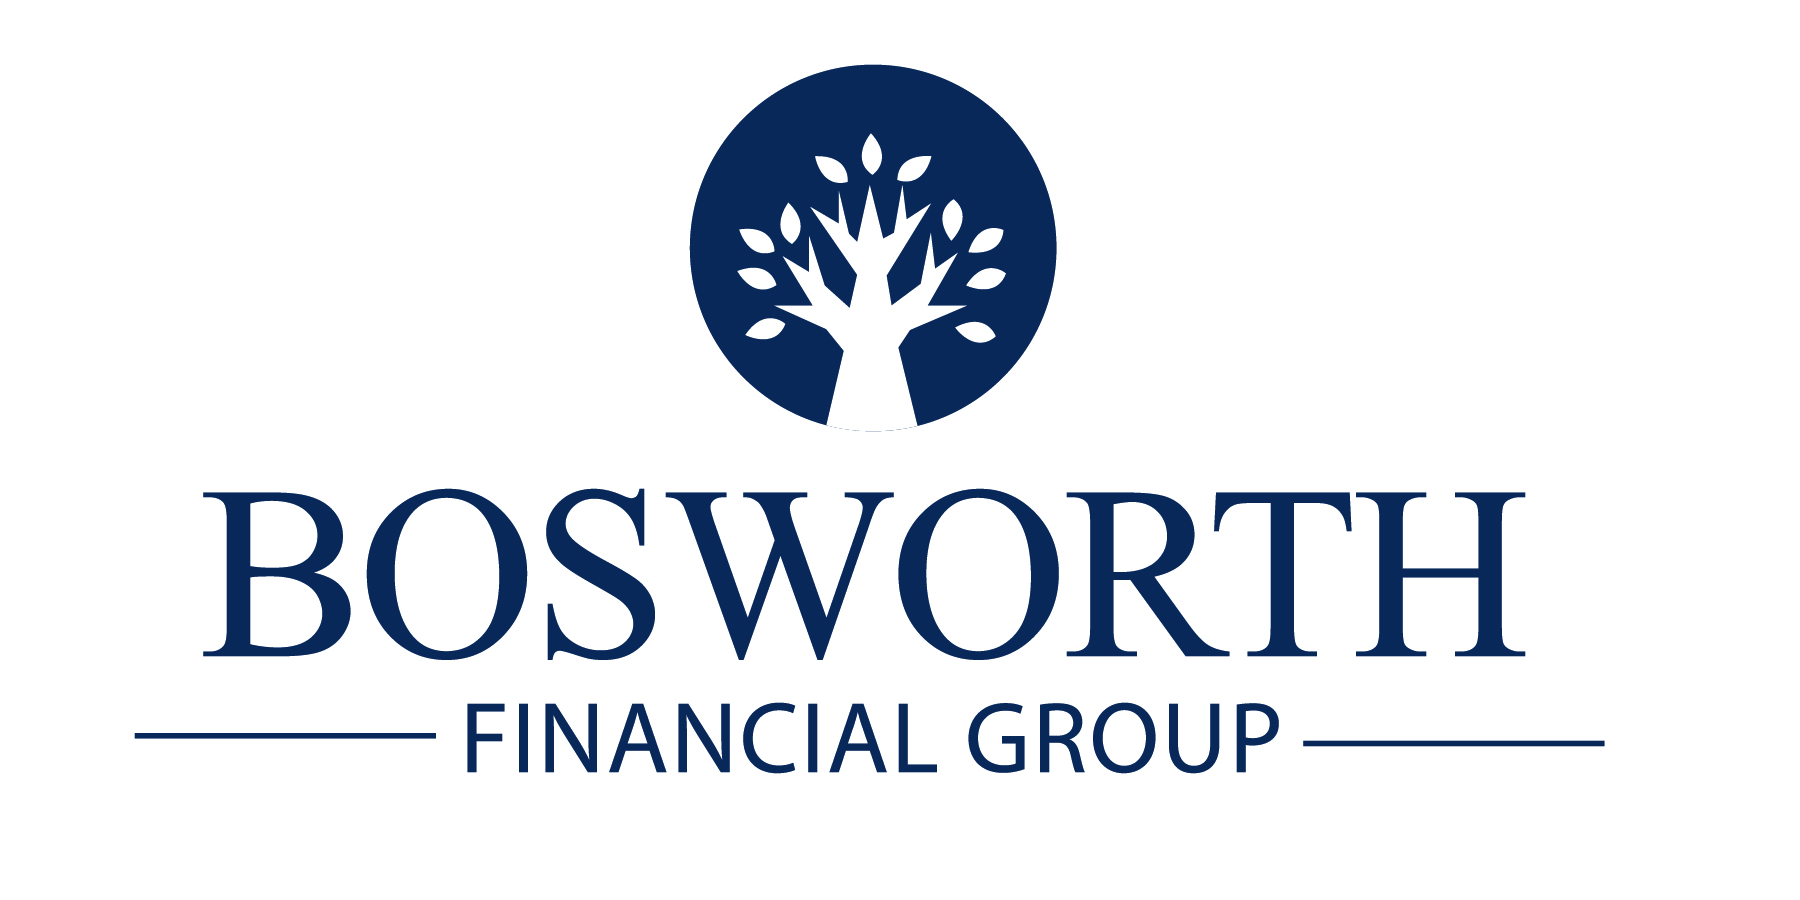 Bosworth Financial Group